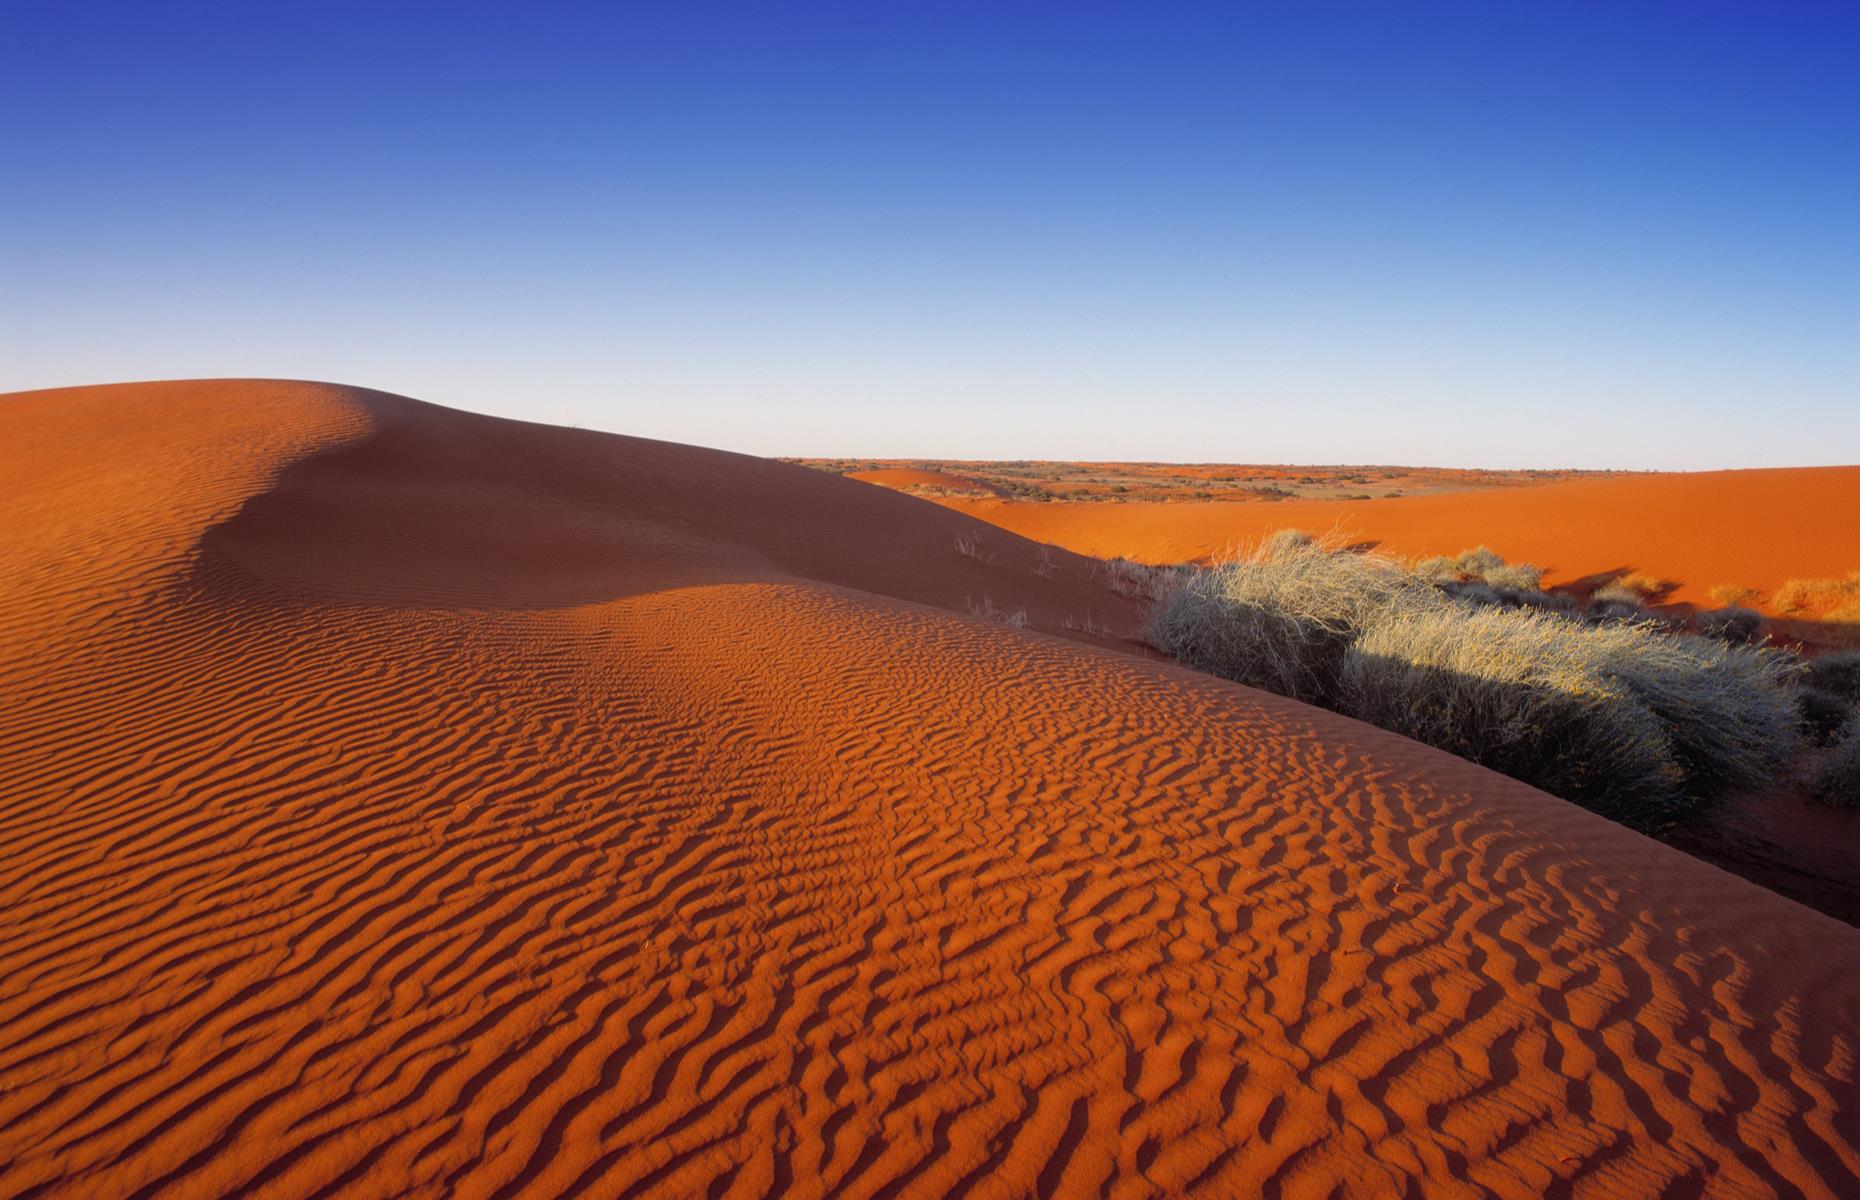 <p>Deep in the heart of Australia, the Simpson Desert is where you’ll find some of its most stark and striking landscapes – rolling red sand dunes, sandstone bluffs and salt pans – and rare wildlife. Covering some 143,000 square km (55,000 sq miles), it straddles three states (Northern Territory, Queensland and South Australia) and is also one of the country’s most harsh and unforgiving regions. Temperatures can soar past 50°C (122°F) in summer so the desert is closed between December and March for safety reasons.</p>